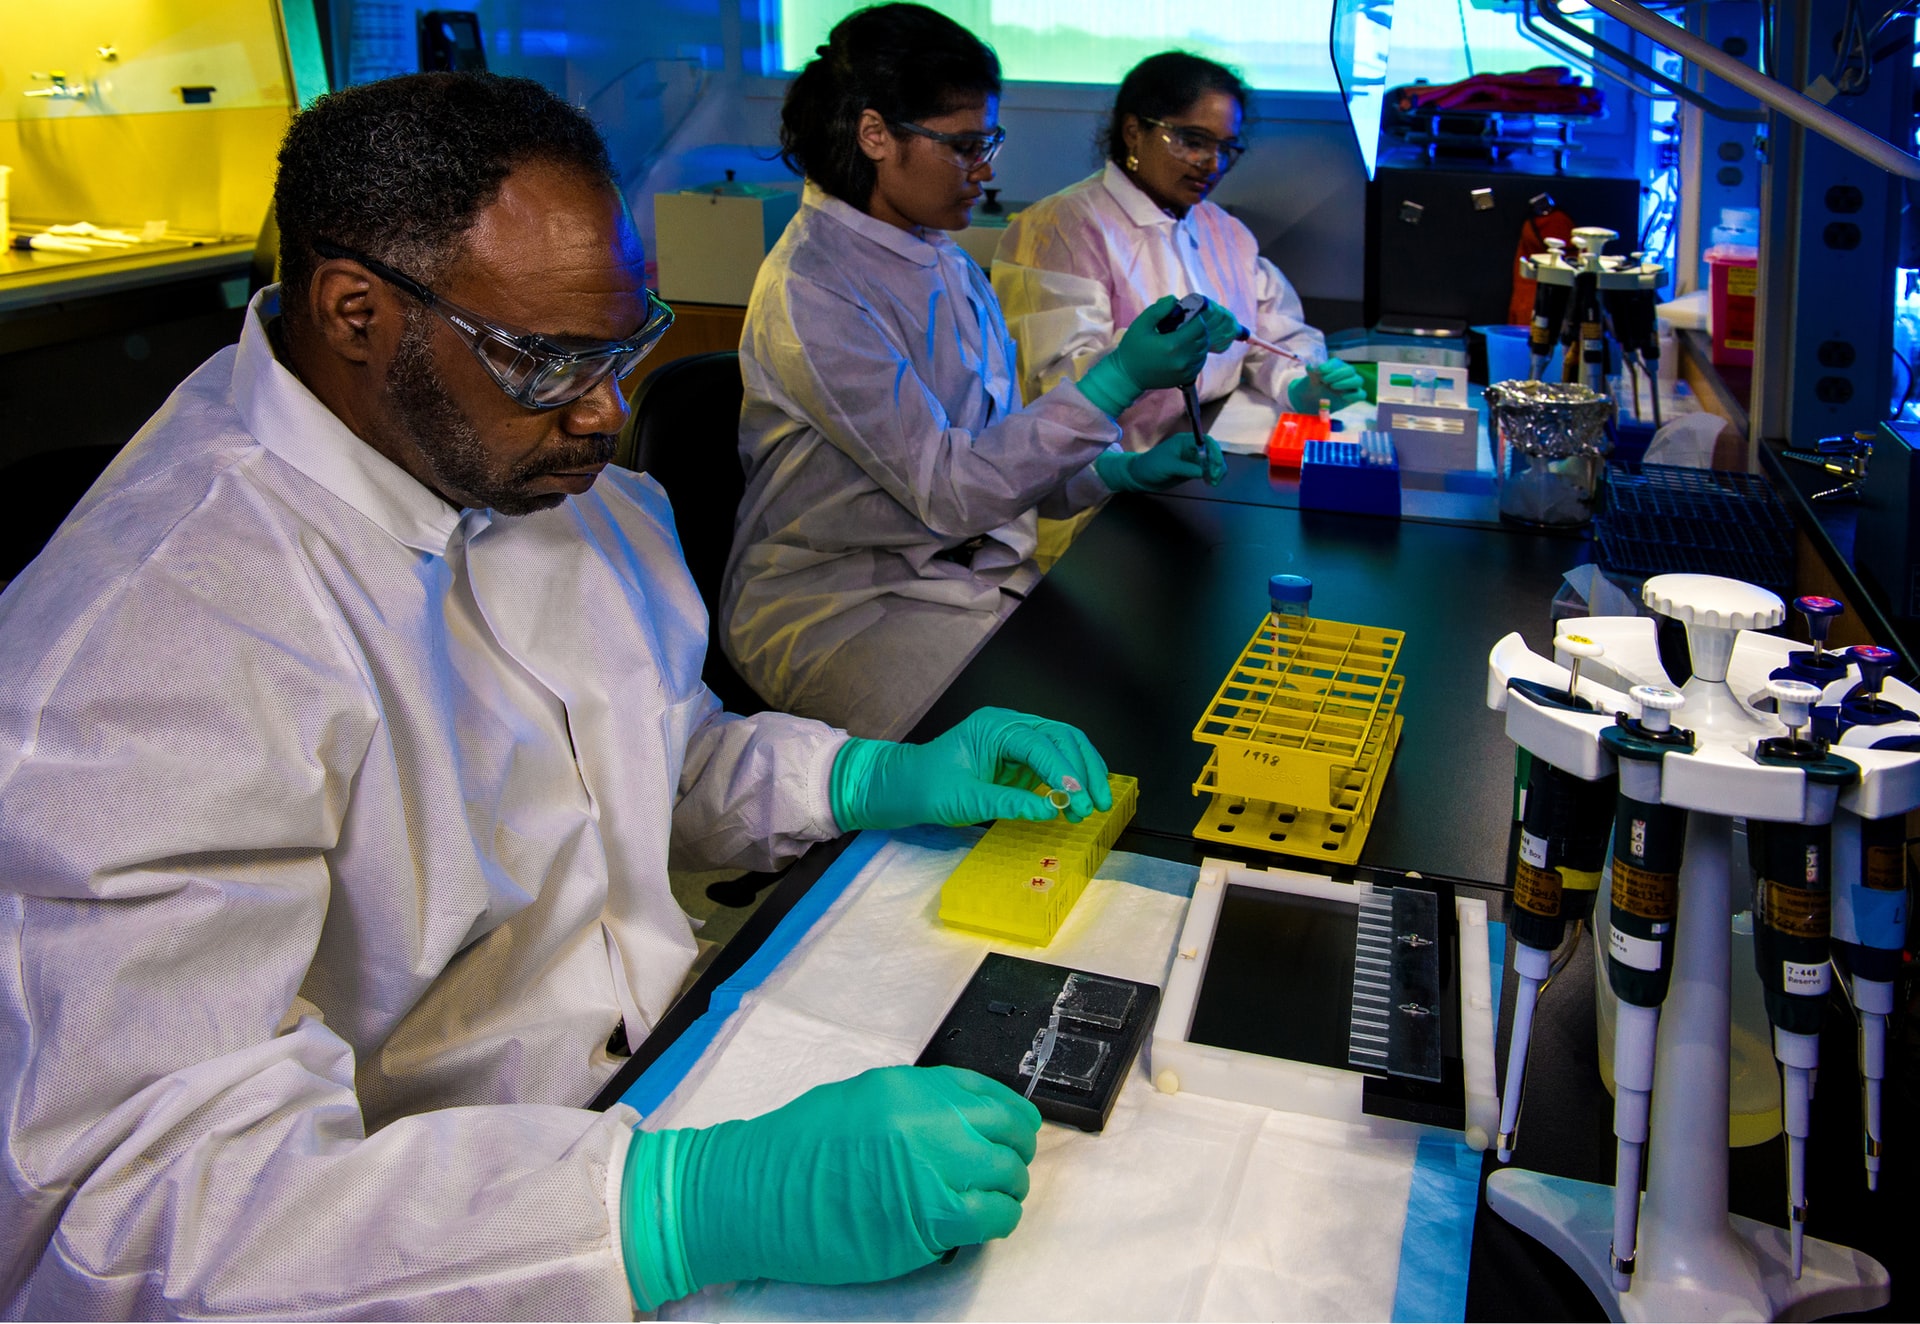 Researcher filling yellow container in laboratory